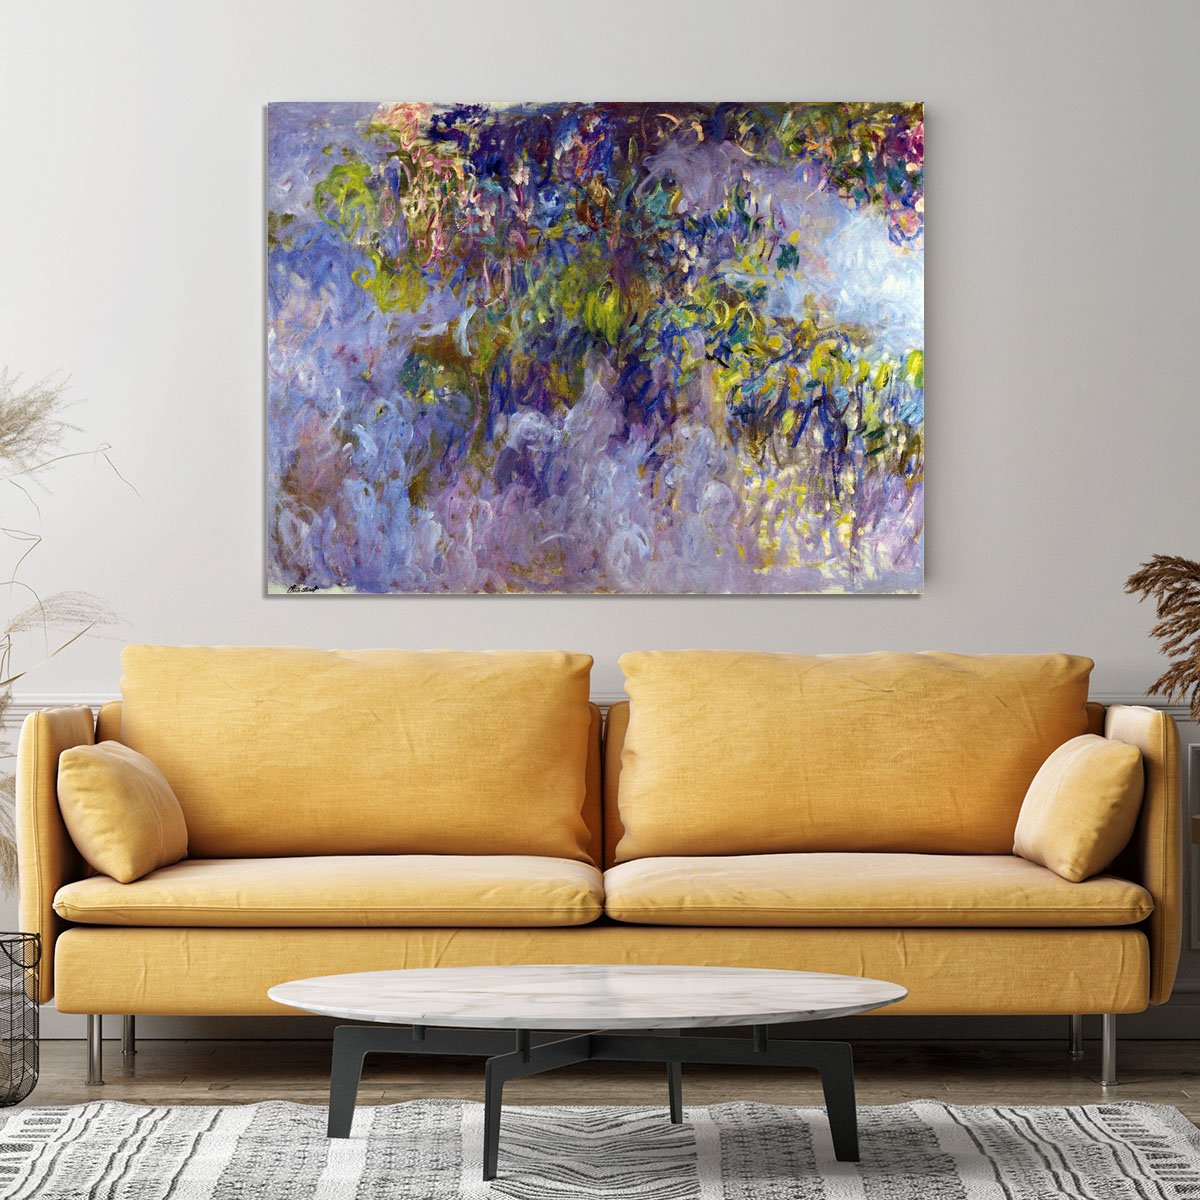 Wisteria 1 by Monet Canvas Print or Poster